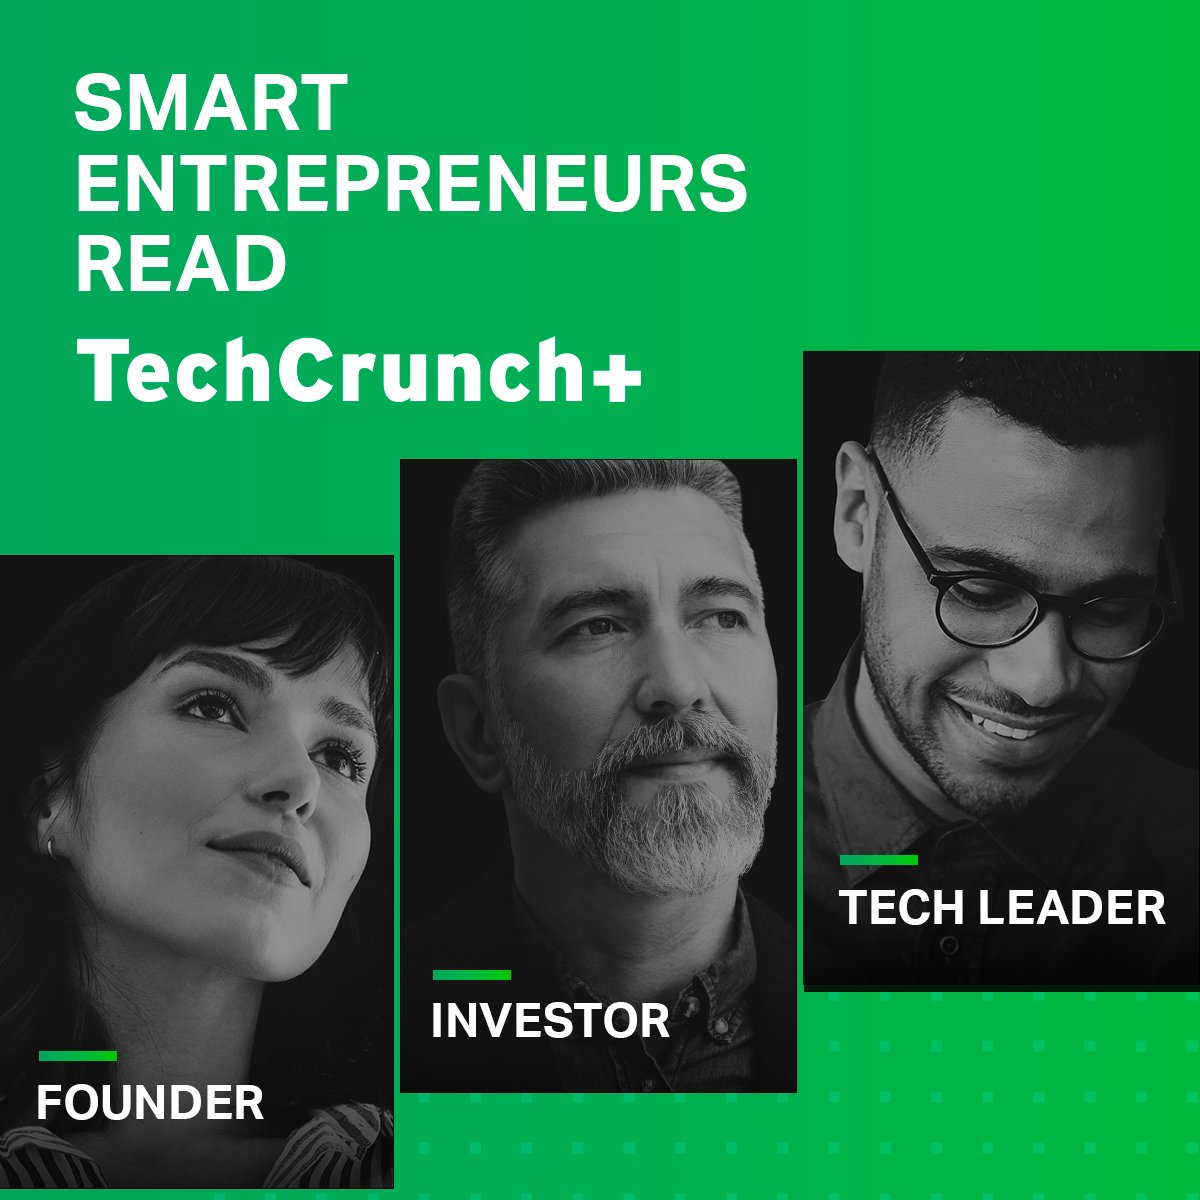 Founders: Click to save 50% on a TechCrunch+ annual pass! Offer ends 05/30